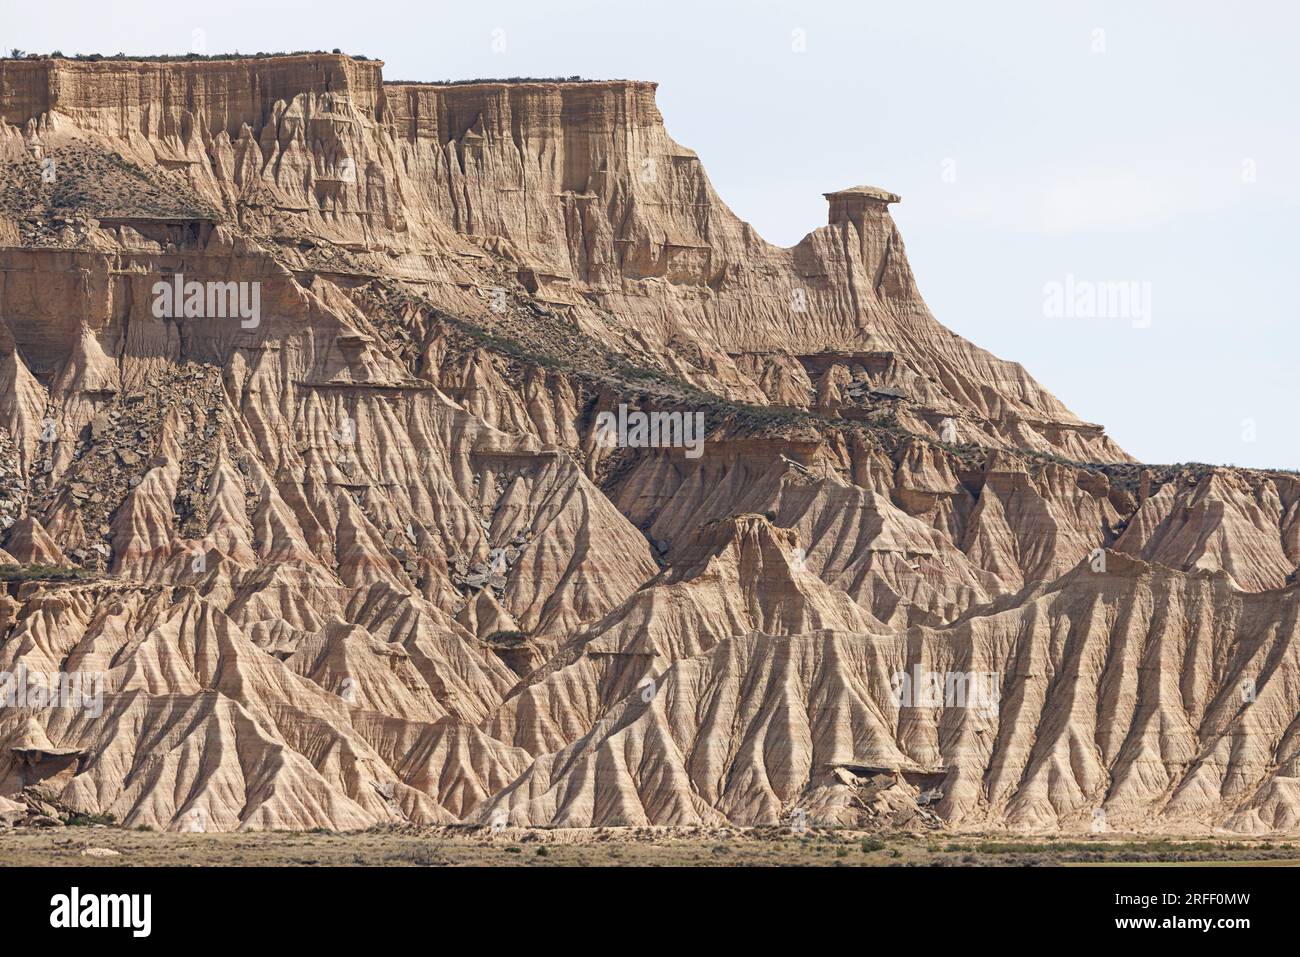 Spain, Navarra, Arguedas, The Bardenas Reales Biosphere Reserve and natural park listed as World Heritage by UNESCO, Bardena Blanca, El Rallon Stock Photo